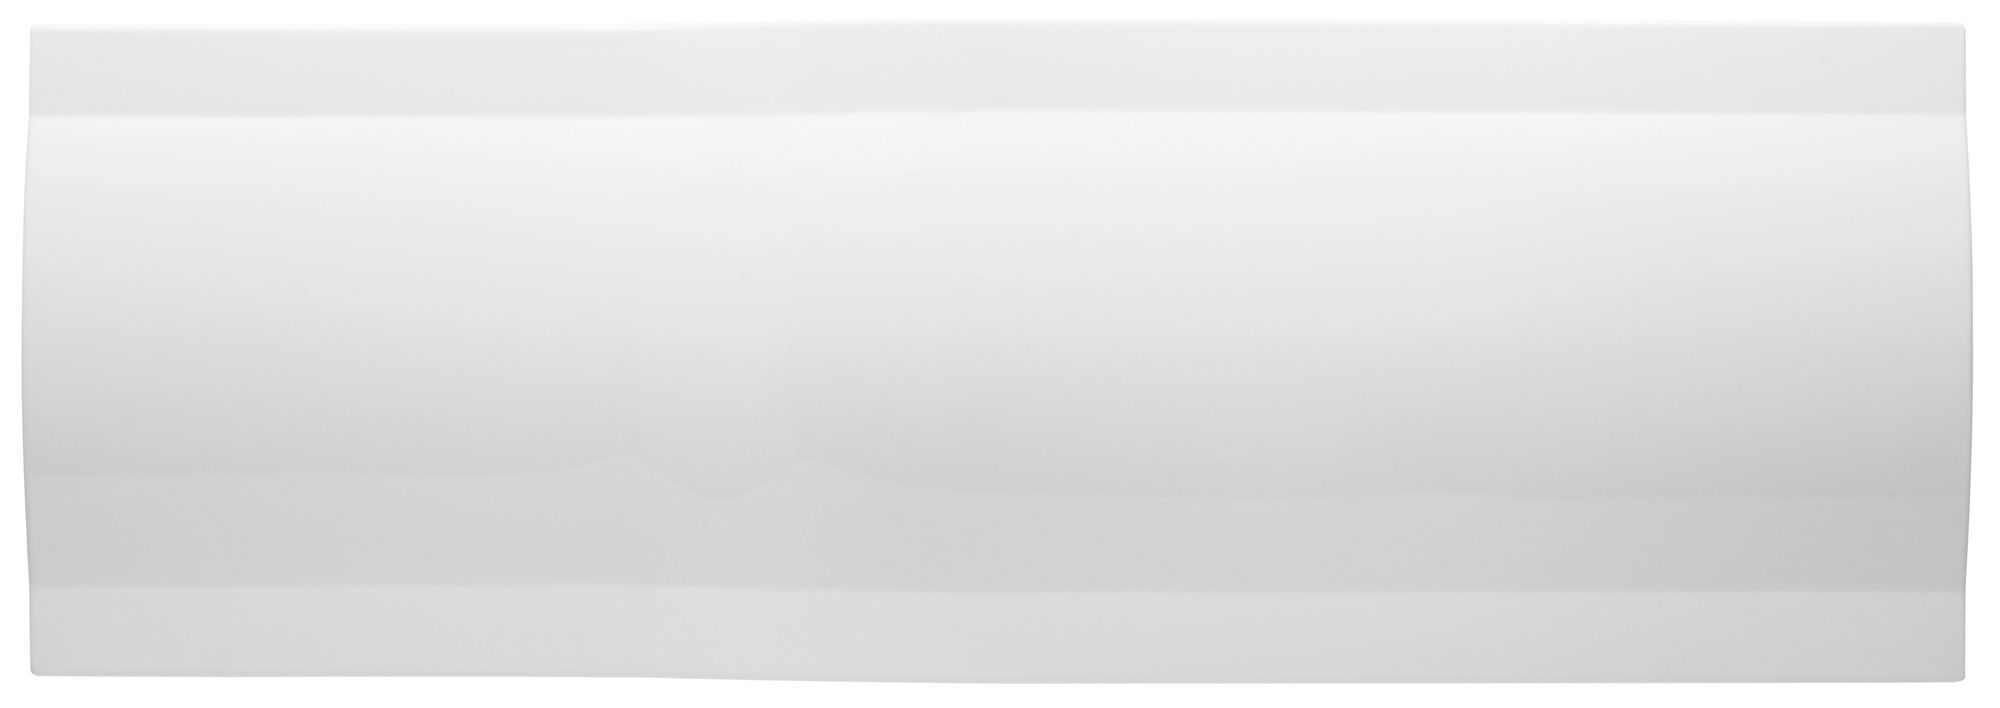 Cooke & Lewis Adelphi White Curved Front Bath panel (H)51.5cm (W)150cm